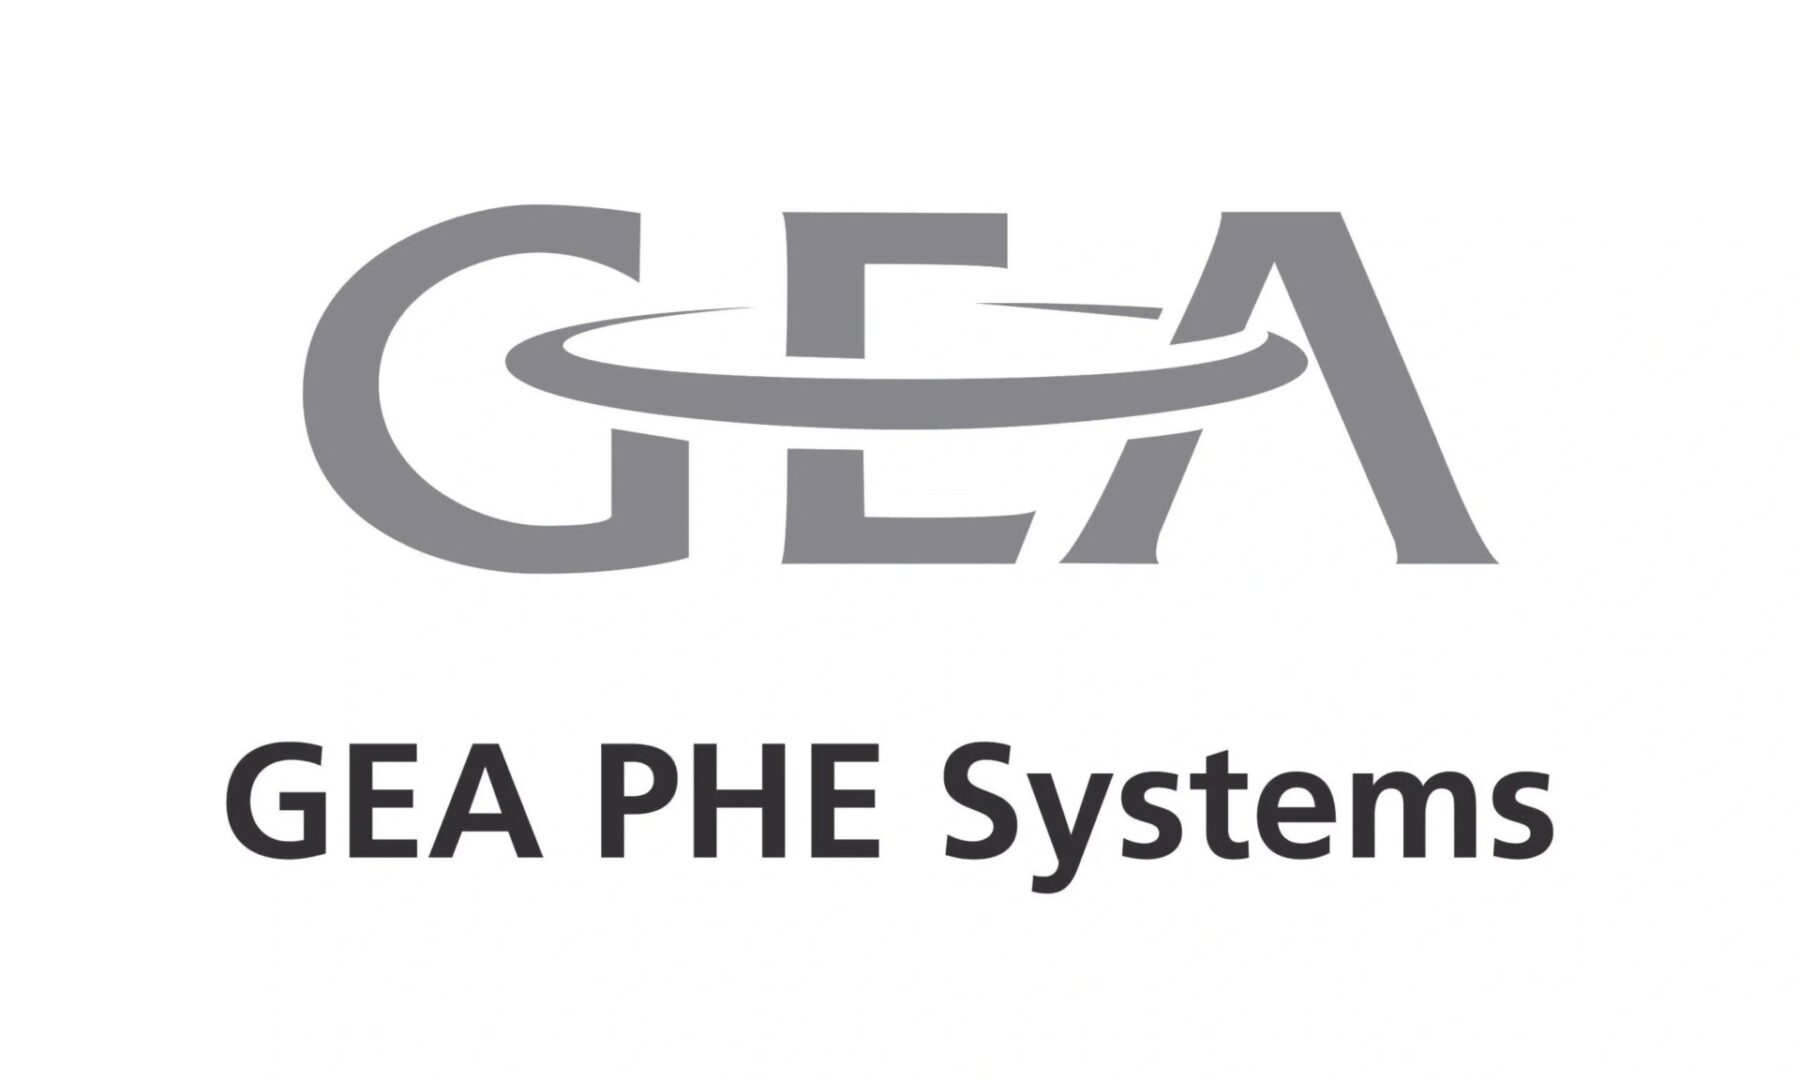 Gea phe system logo with a circle in the middle